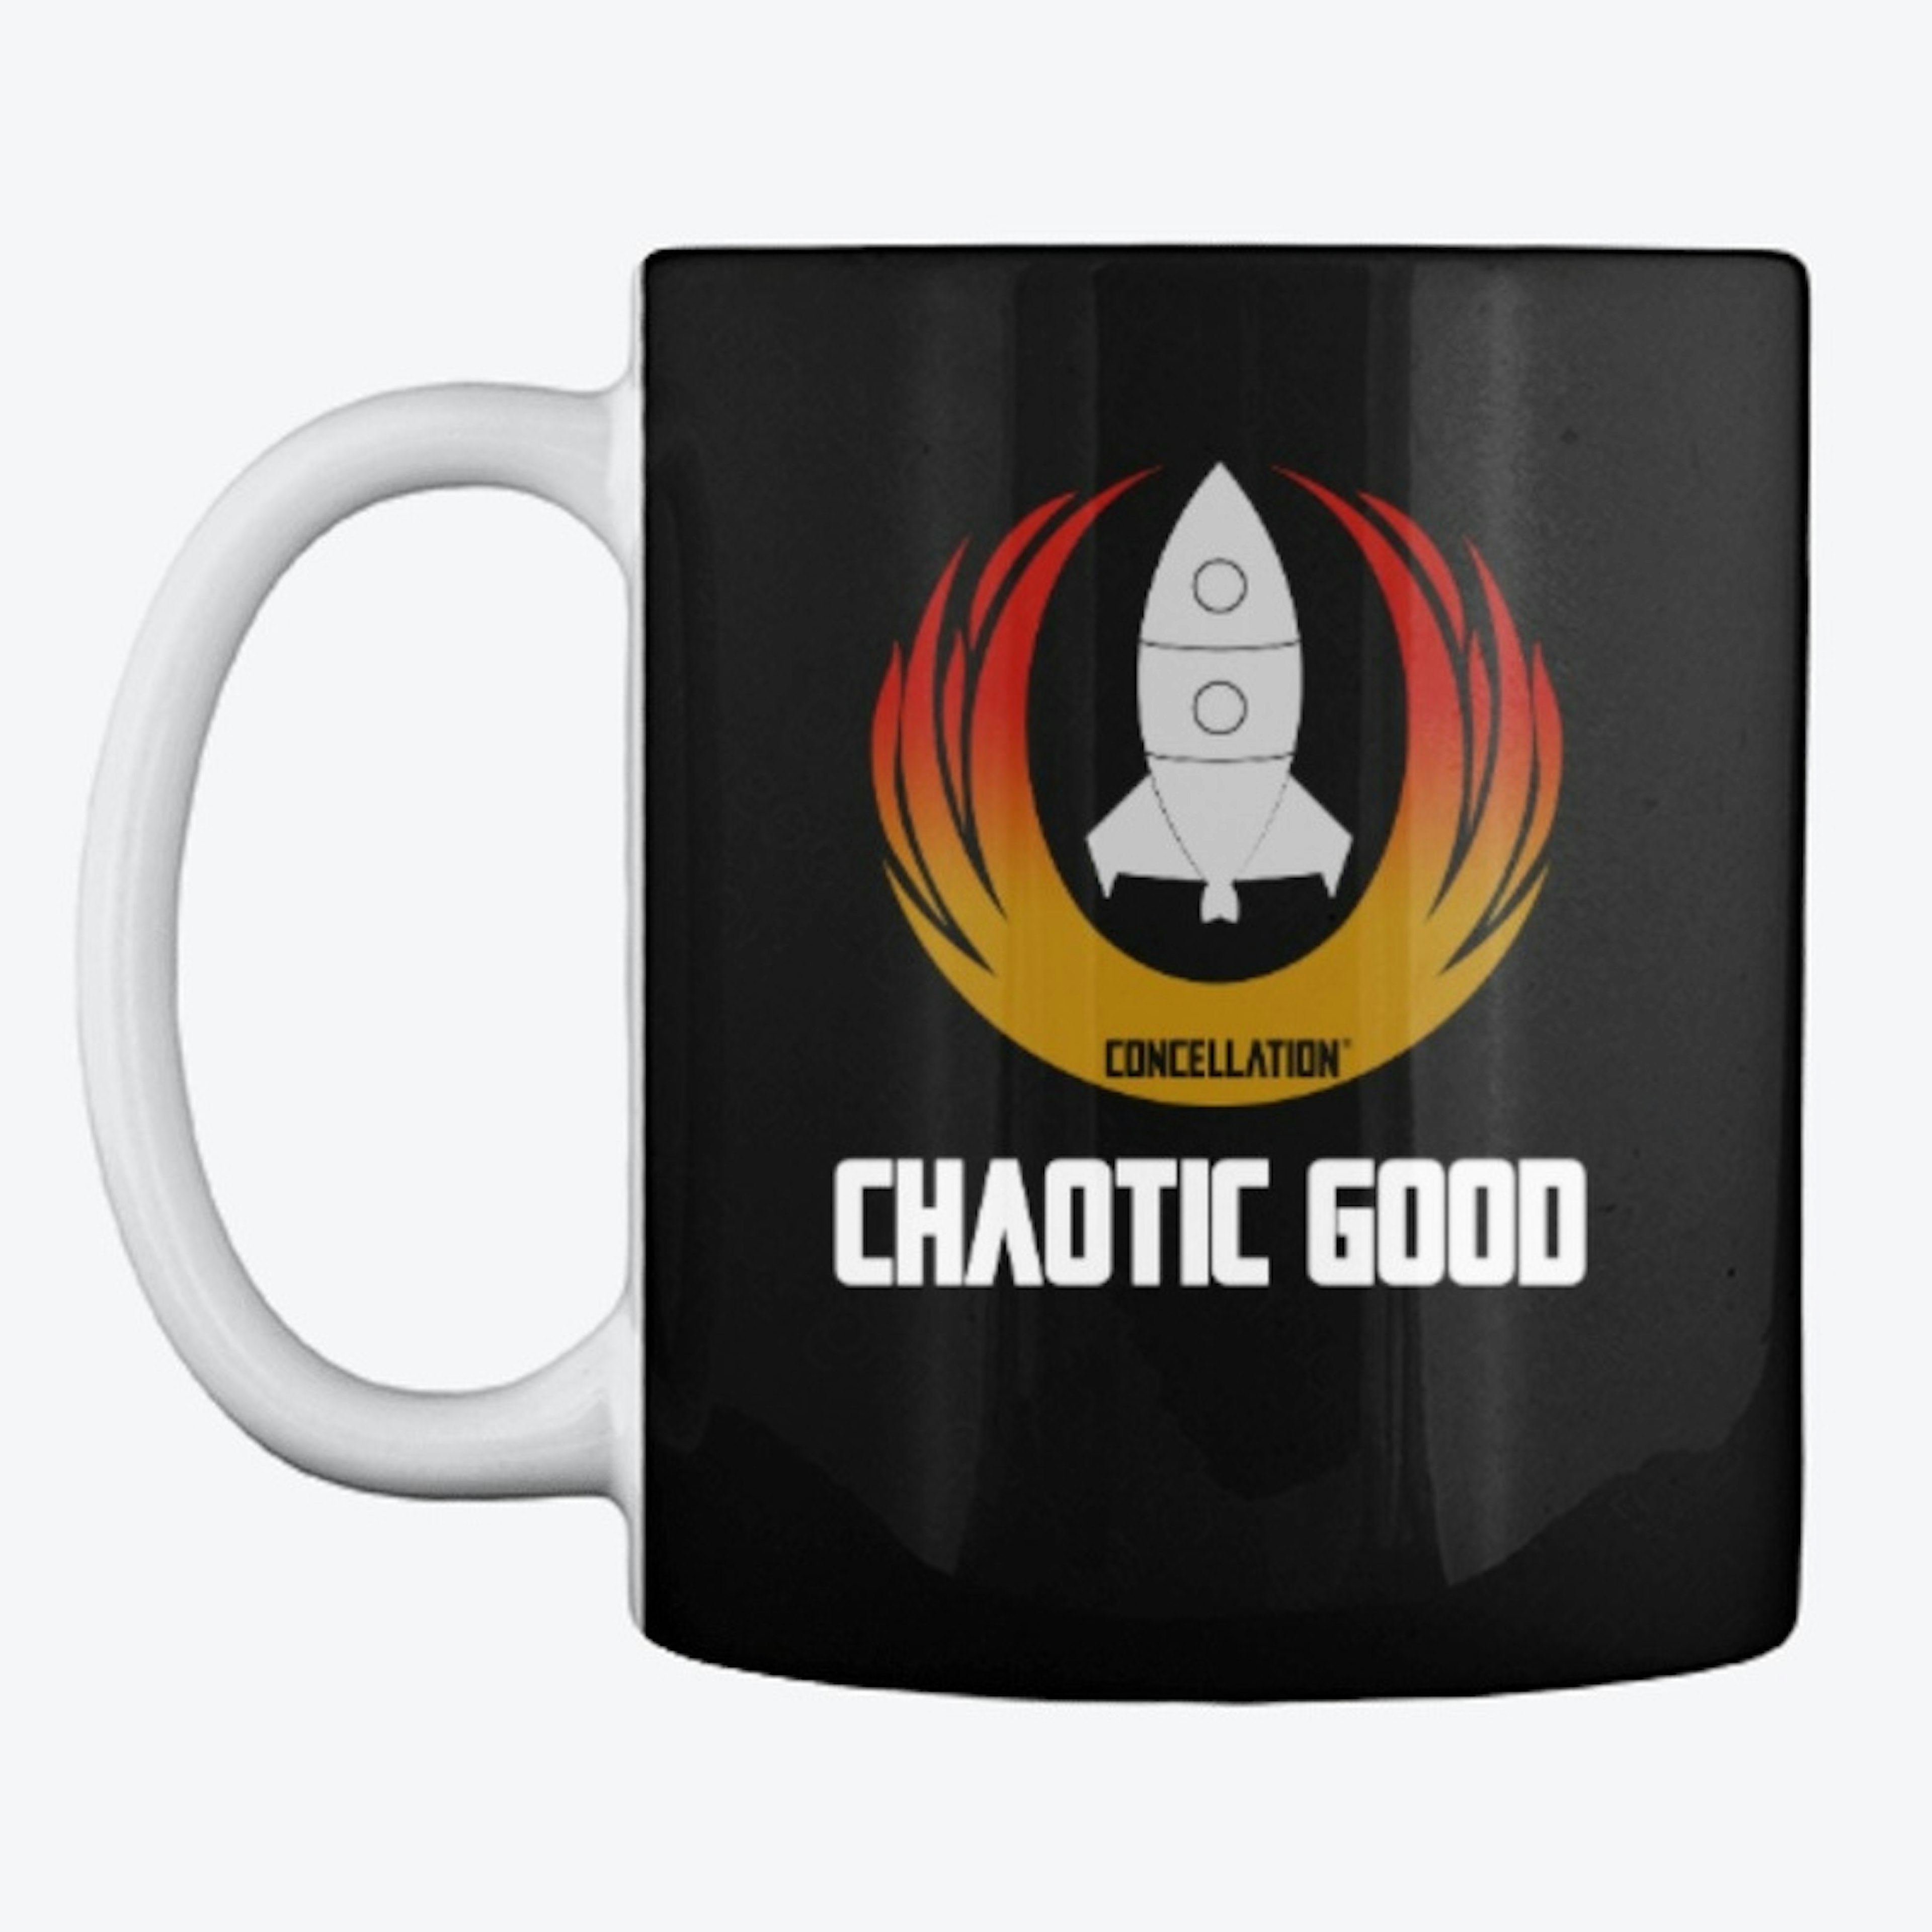 Alignment: Chaotic Good